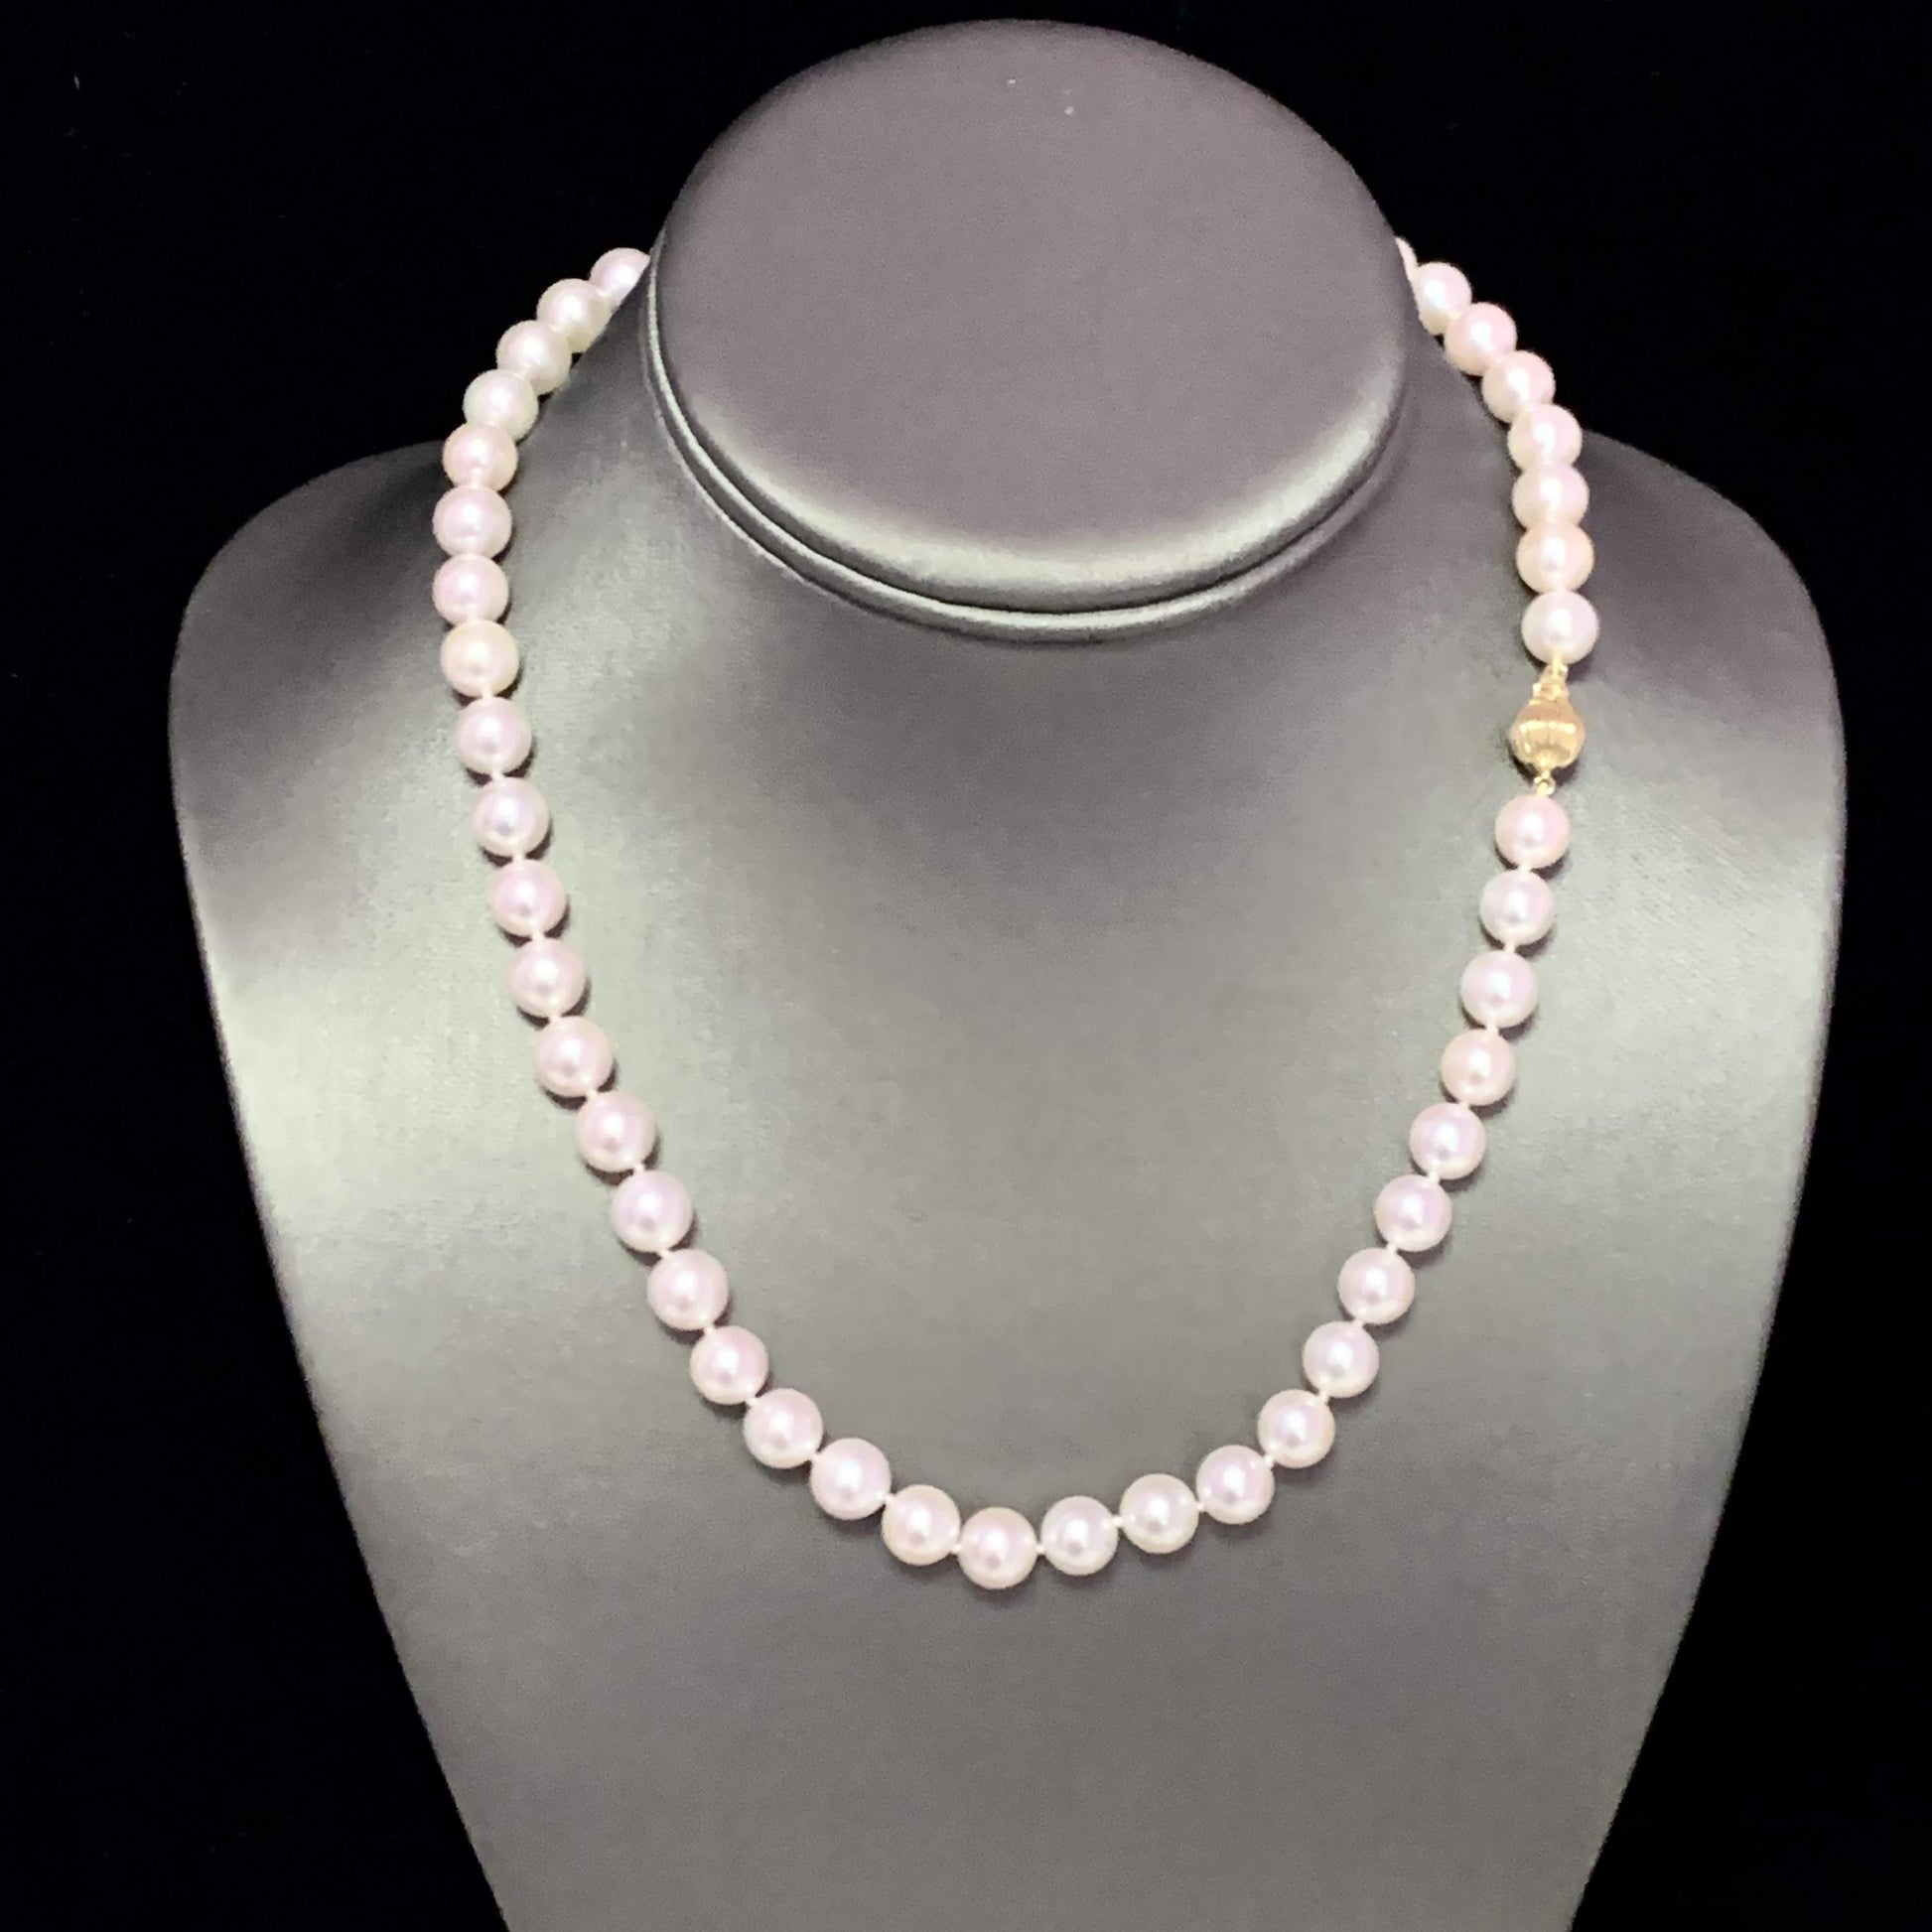 Akoya Pearl Necklace 14k Yellow Gold 17" 8.5 mm Certified $4,950 114453 - Certified Estate Jewelry